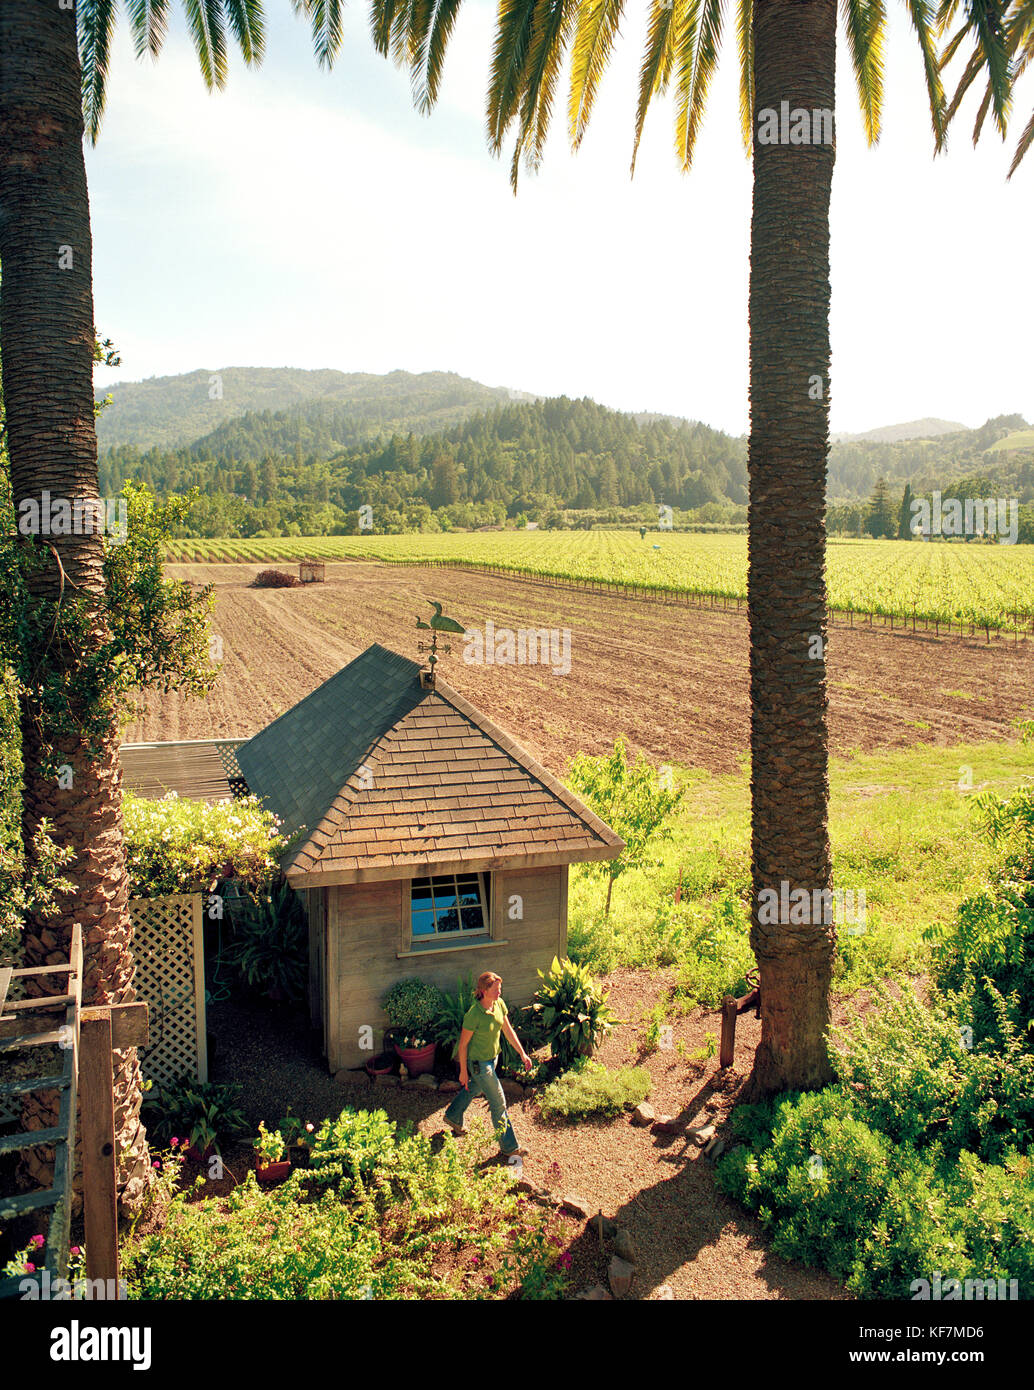 USA, California, Napa, elevated view of woman walking by a garden shed with a vineyard in the background, Spottswoode Vineyard Stock Photo